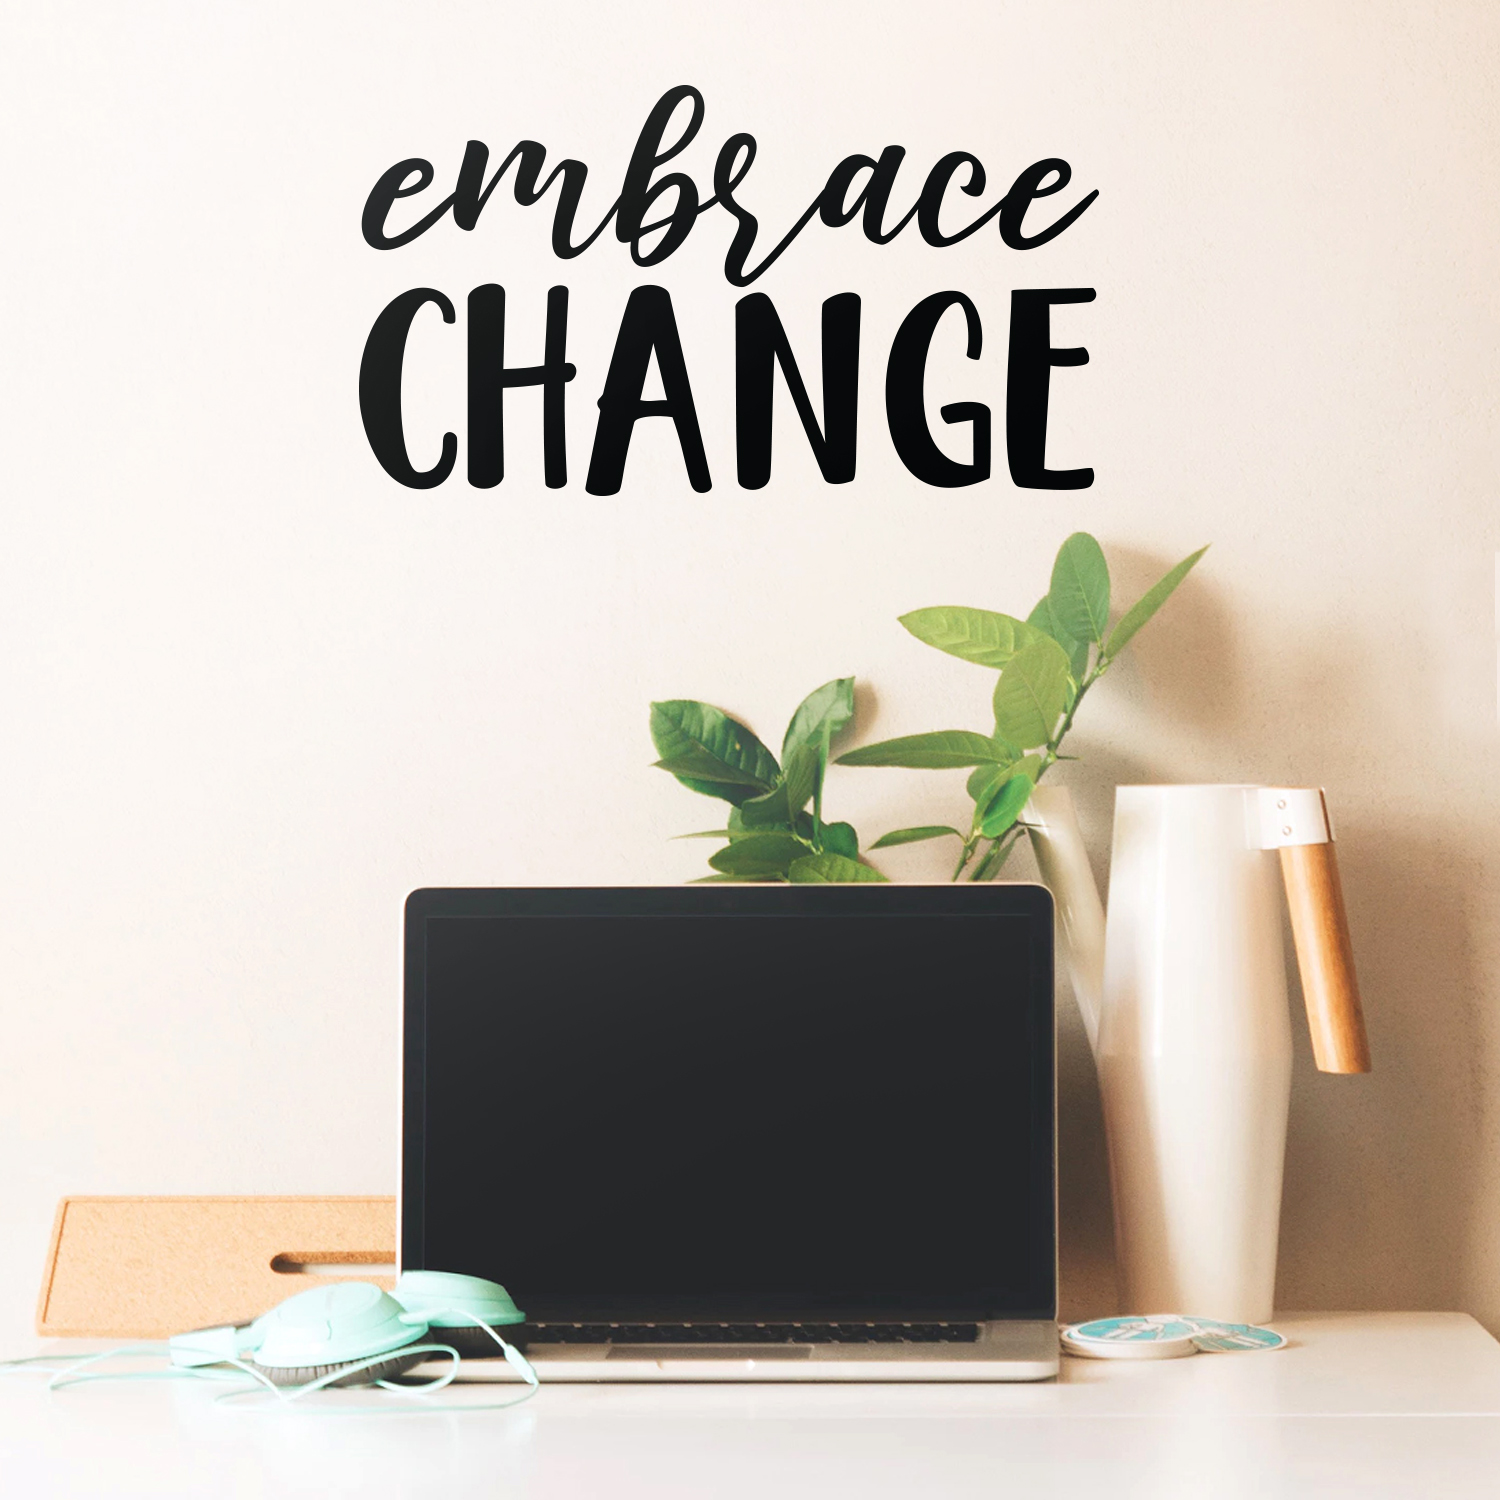 Embrace change quotes - saloclouds